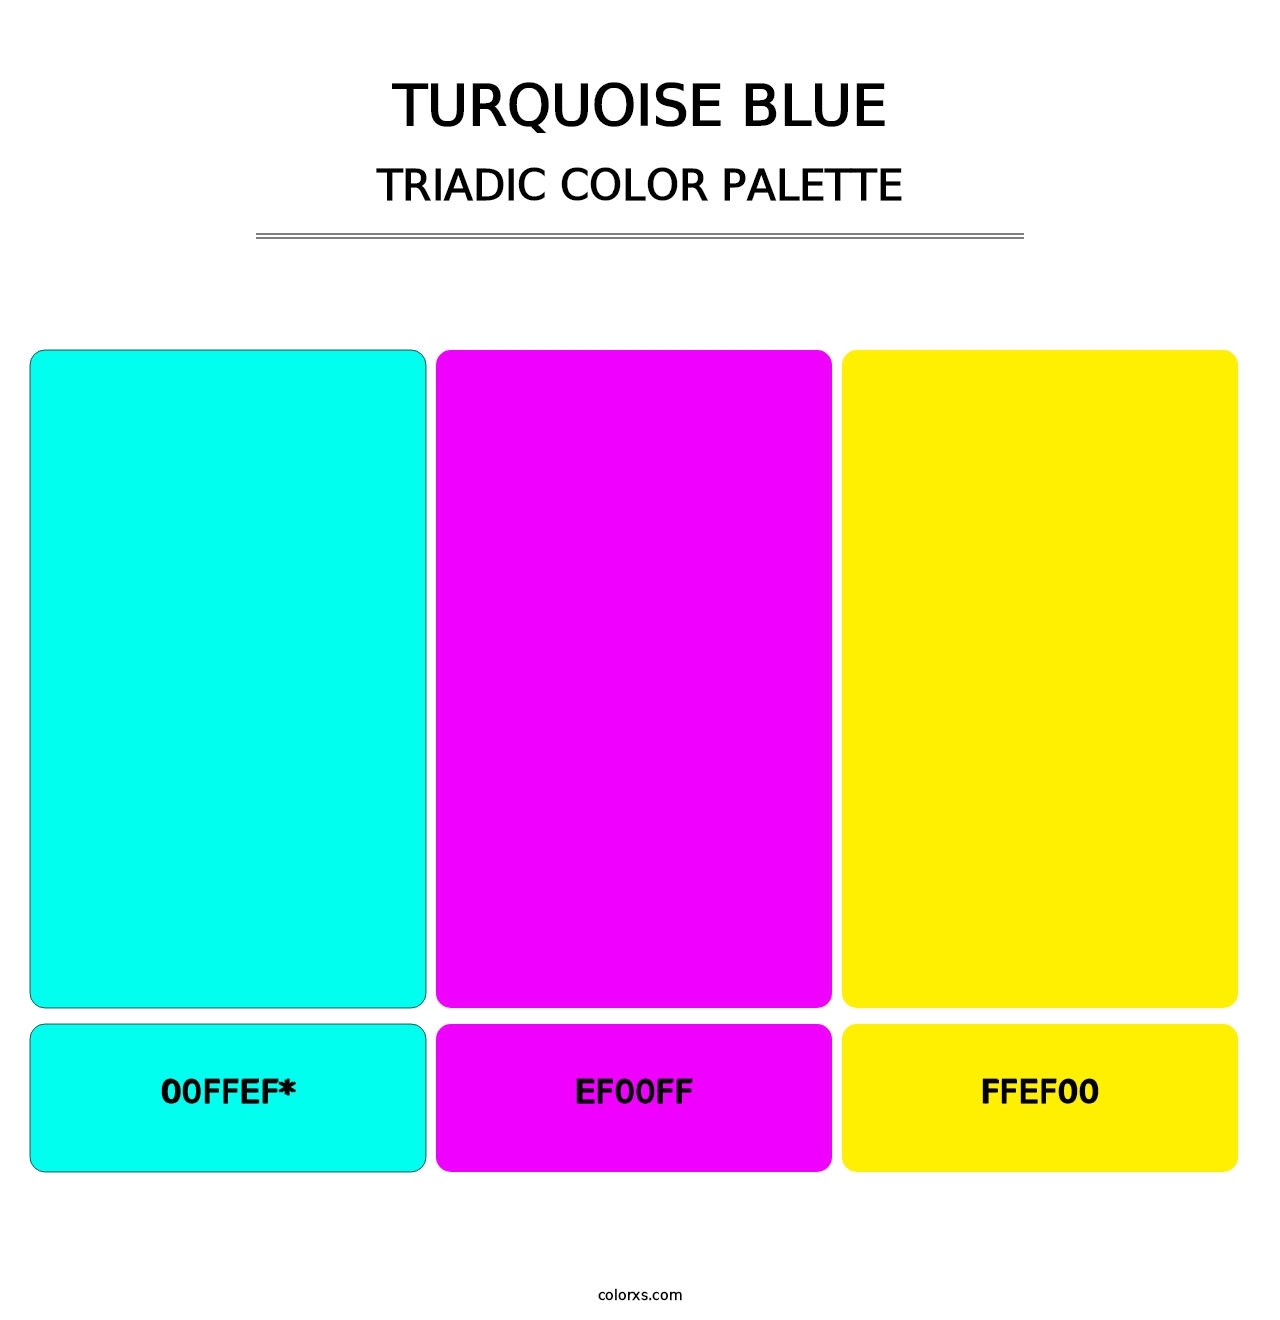 Turquoise Blue - Triadic Color Palette